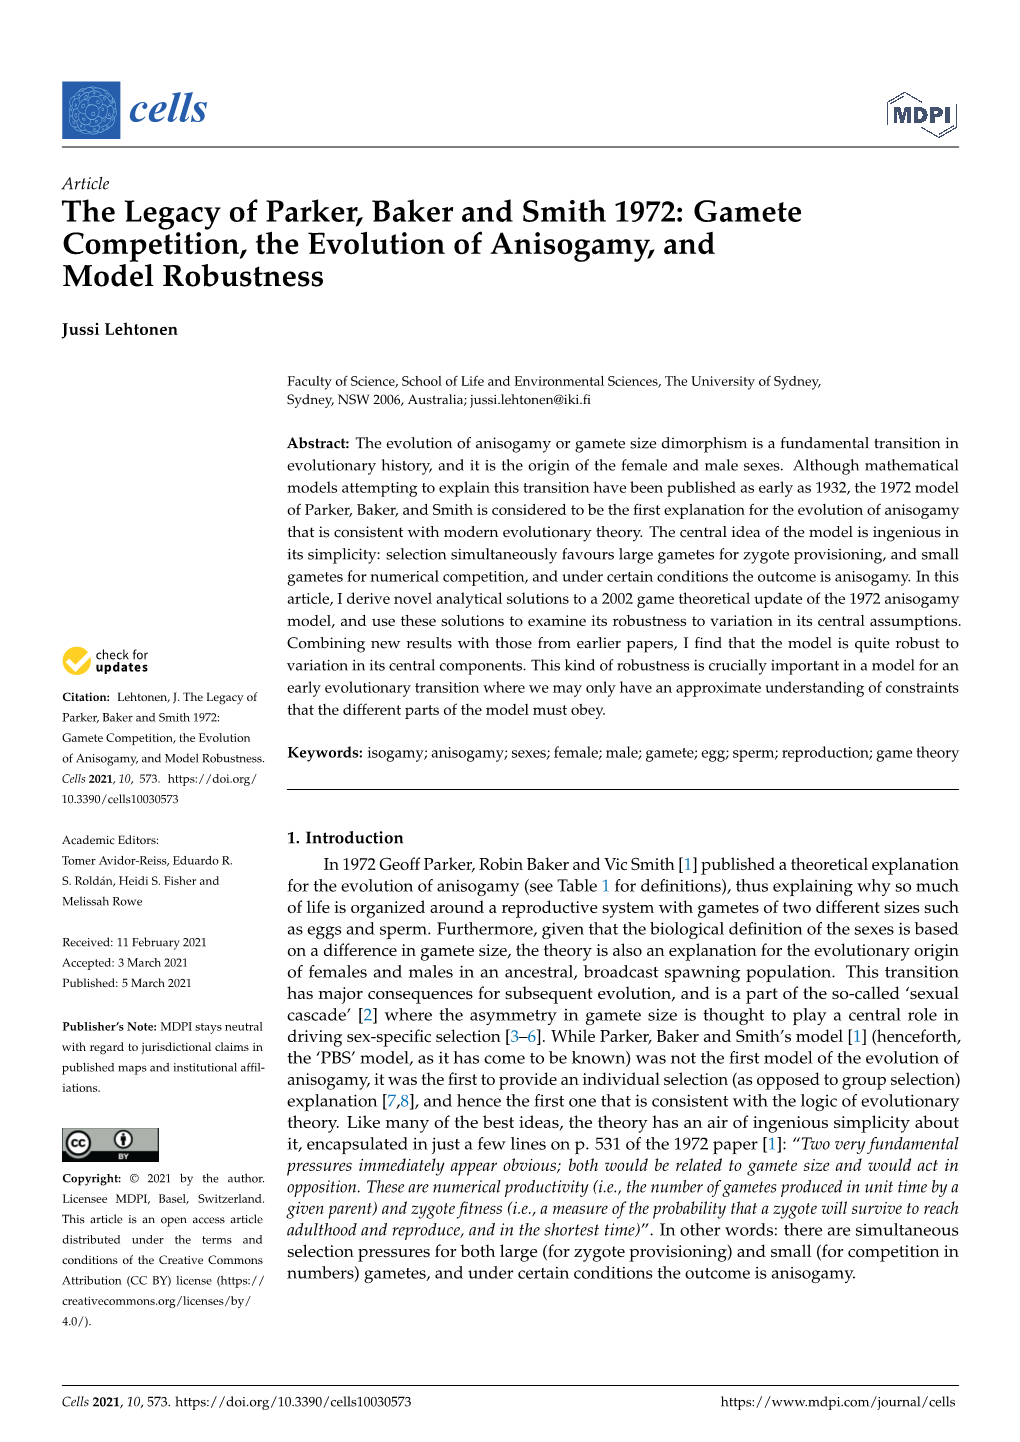 Gamete Competition, the Evolution of Anisogamy, and Model Robustness